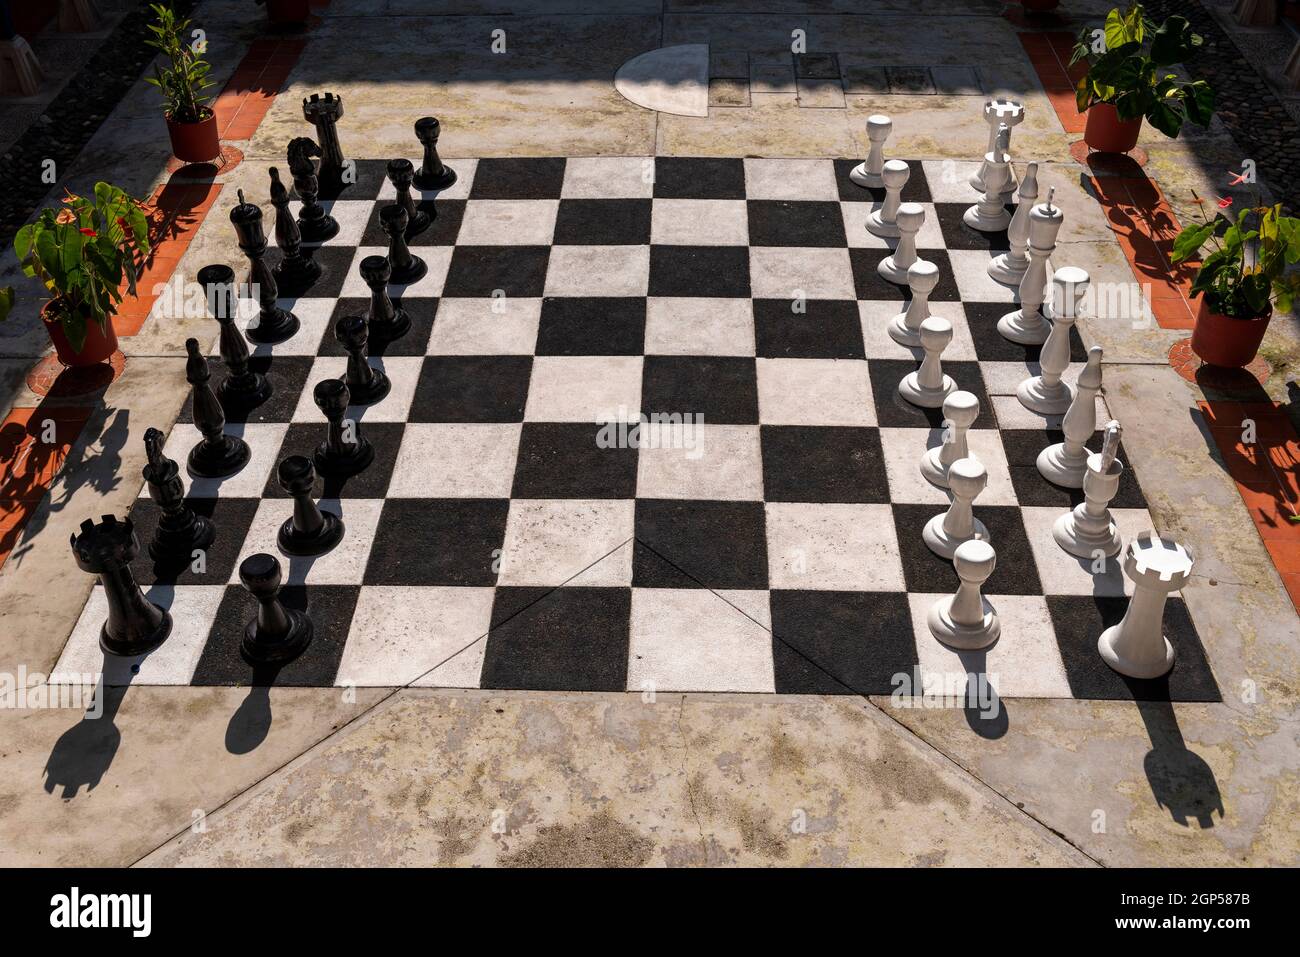 A large life size knight chess pieces on a large chess board, outside on a bright sunny day Stock Photo